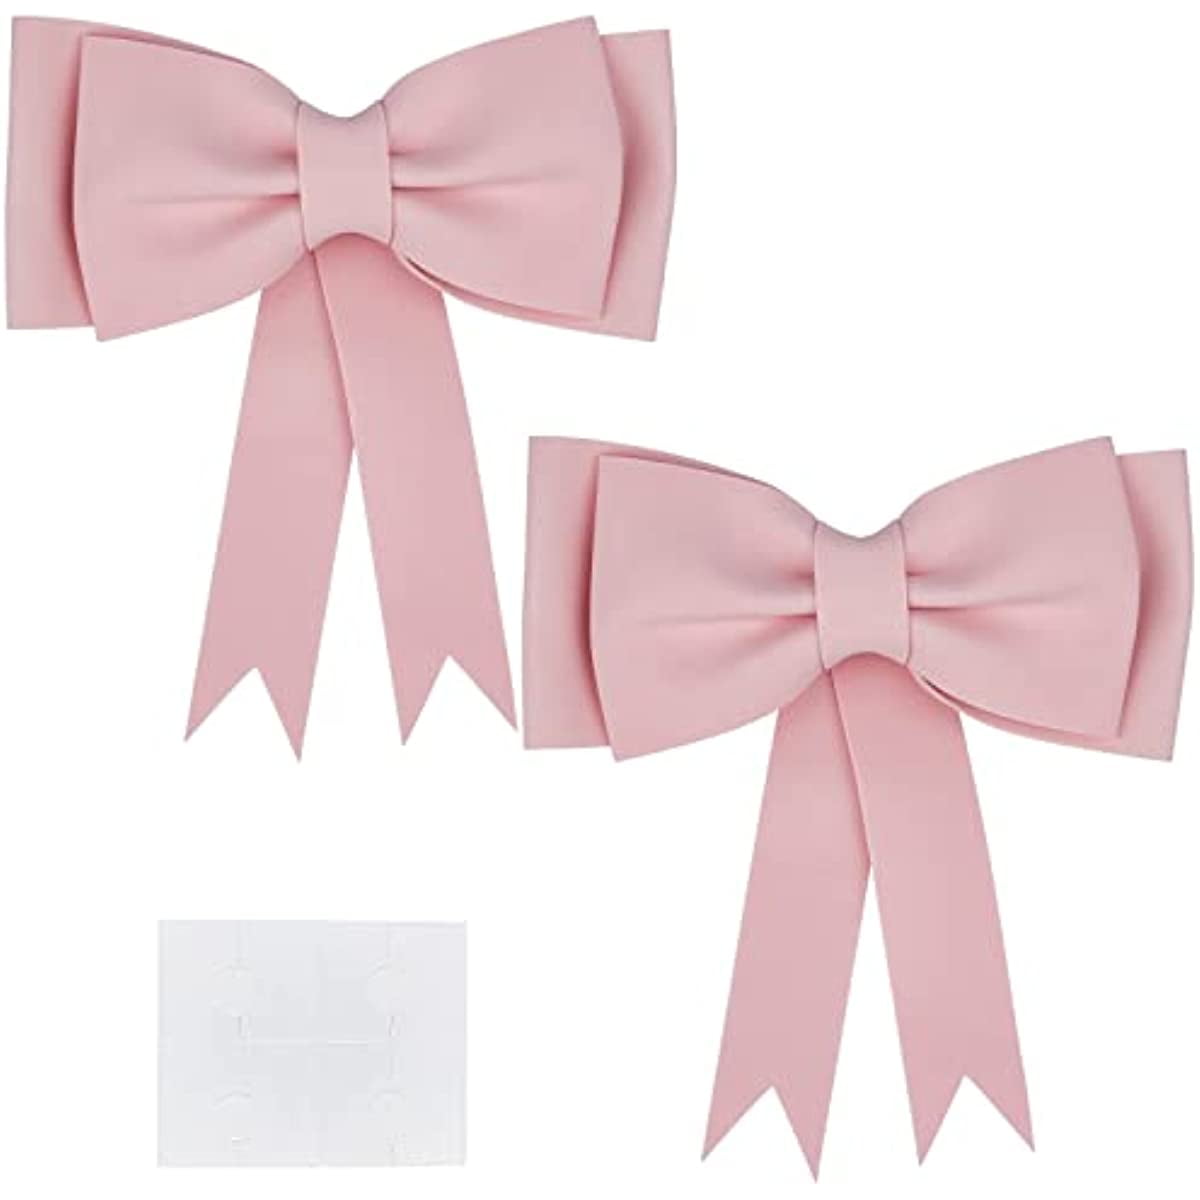 2PCS Pink Bow 3D Wrapping Bows 8 inch Christmas Ornaments Foam Wreath Bows  Wedding Party Decoration for Wedding Birthday Christmas Valentine's Day 